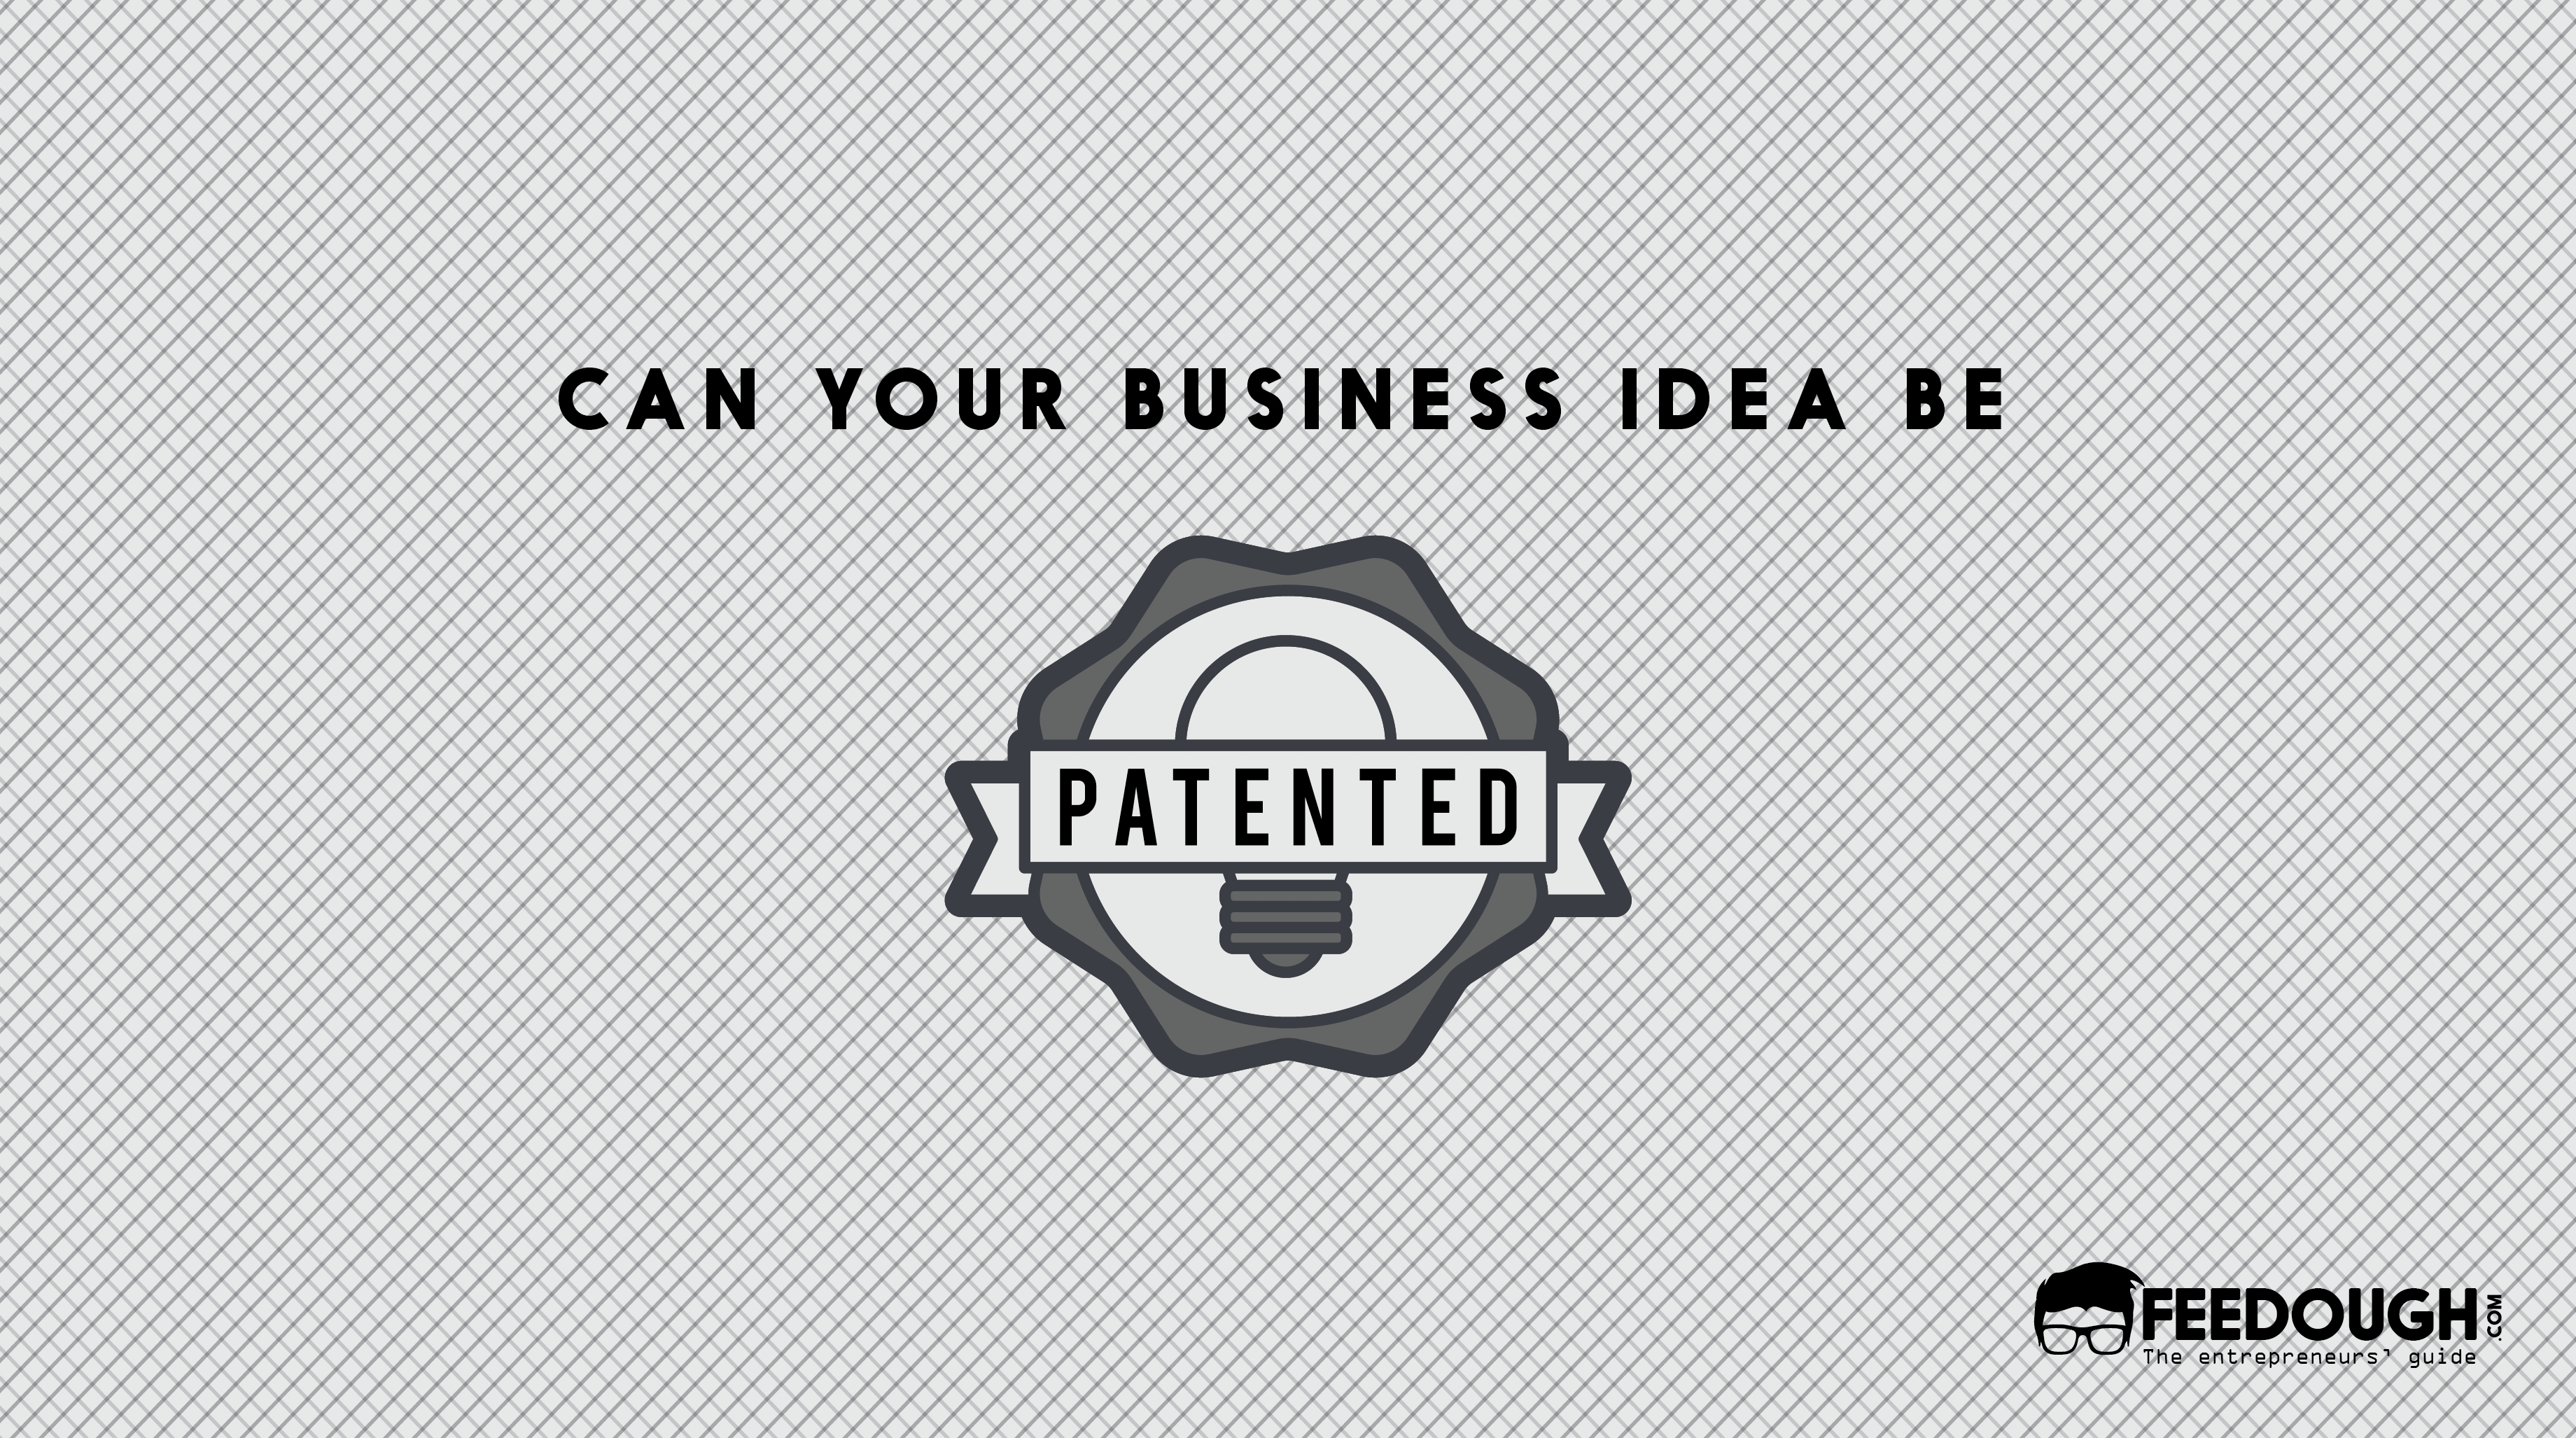 10 Elegant Can An Idea Be Patented can you patent your business idea feedough 1 2022